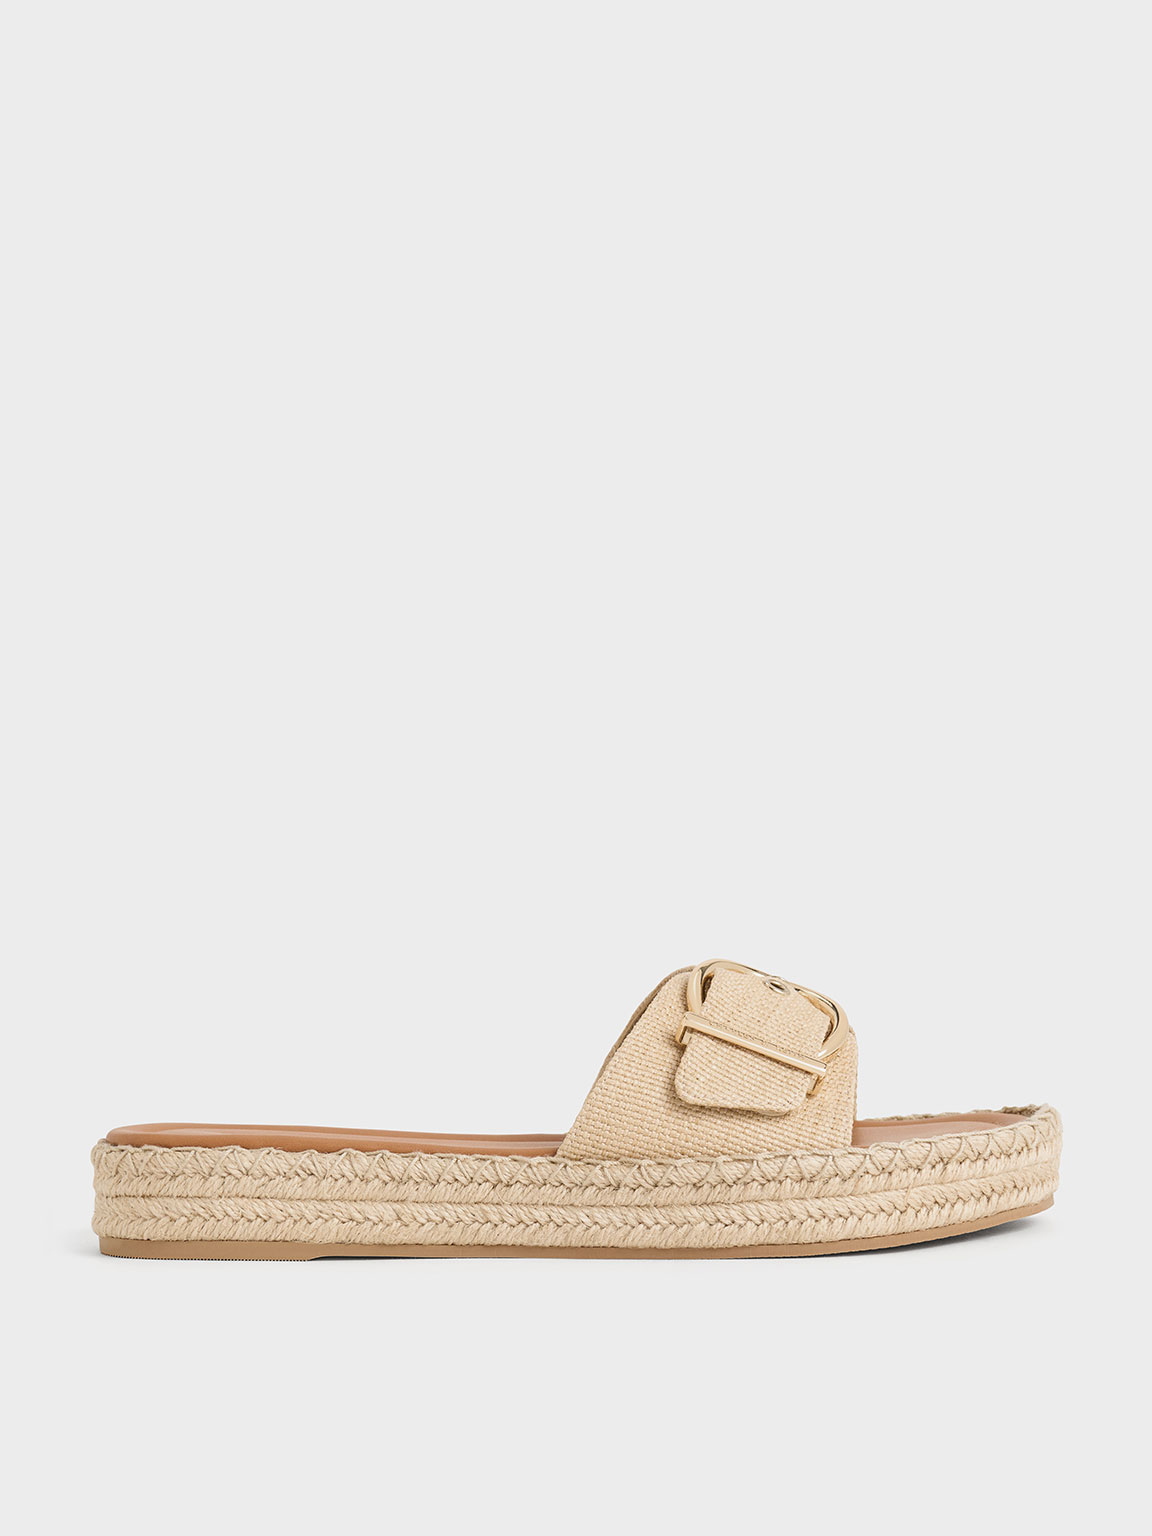 Shop Charles & Keith - Buckled Woven Espadrille Sandals